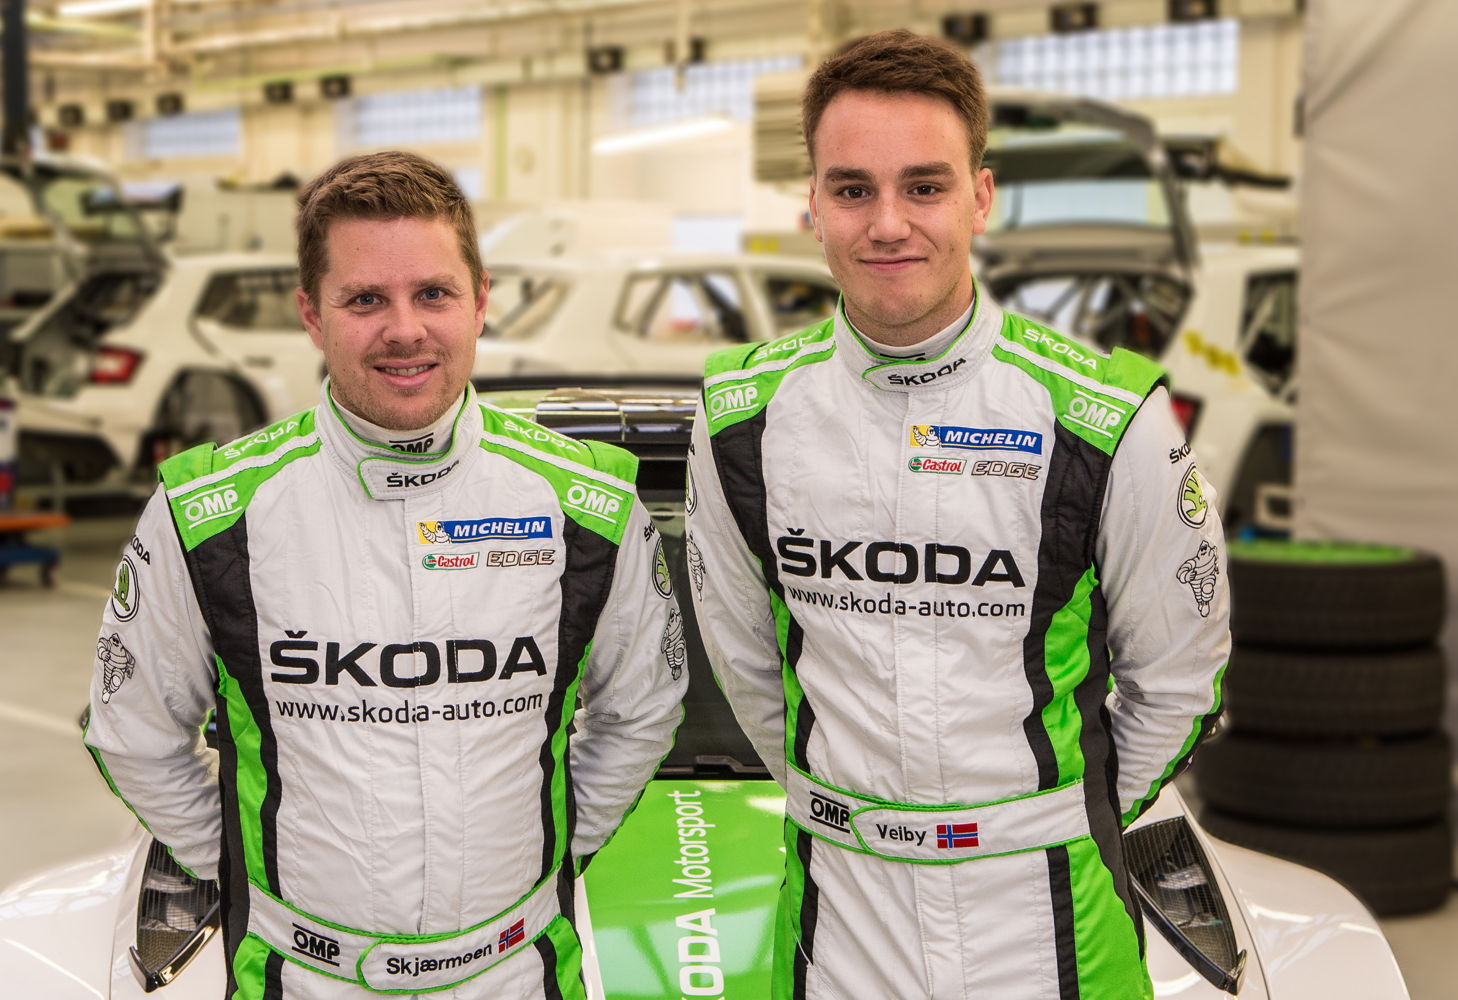 At Rally Sweden, second round of 2018 FIA World Rally Championship, Ole Christian Veiby (right) and co-driver Stig Rune Skjærmoen aim for a podium position in WRC 2 category with their ŠKODA FABIA R5.